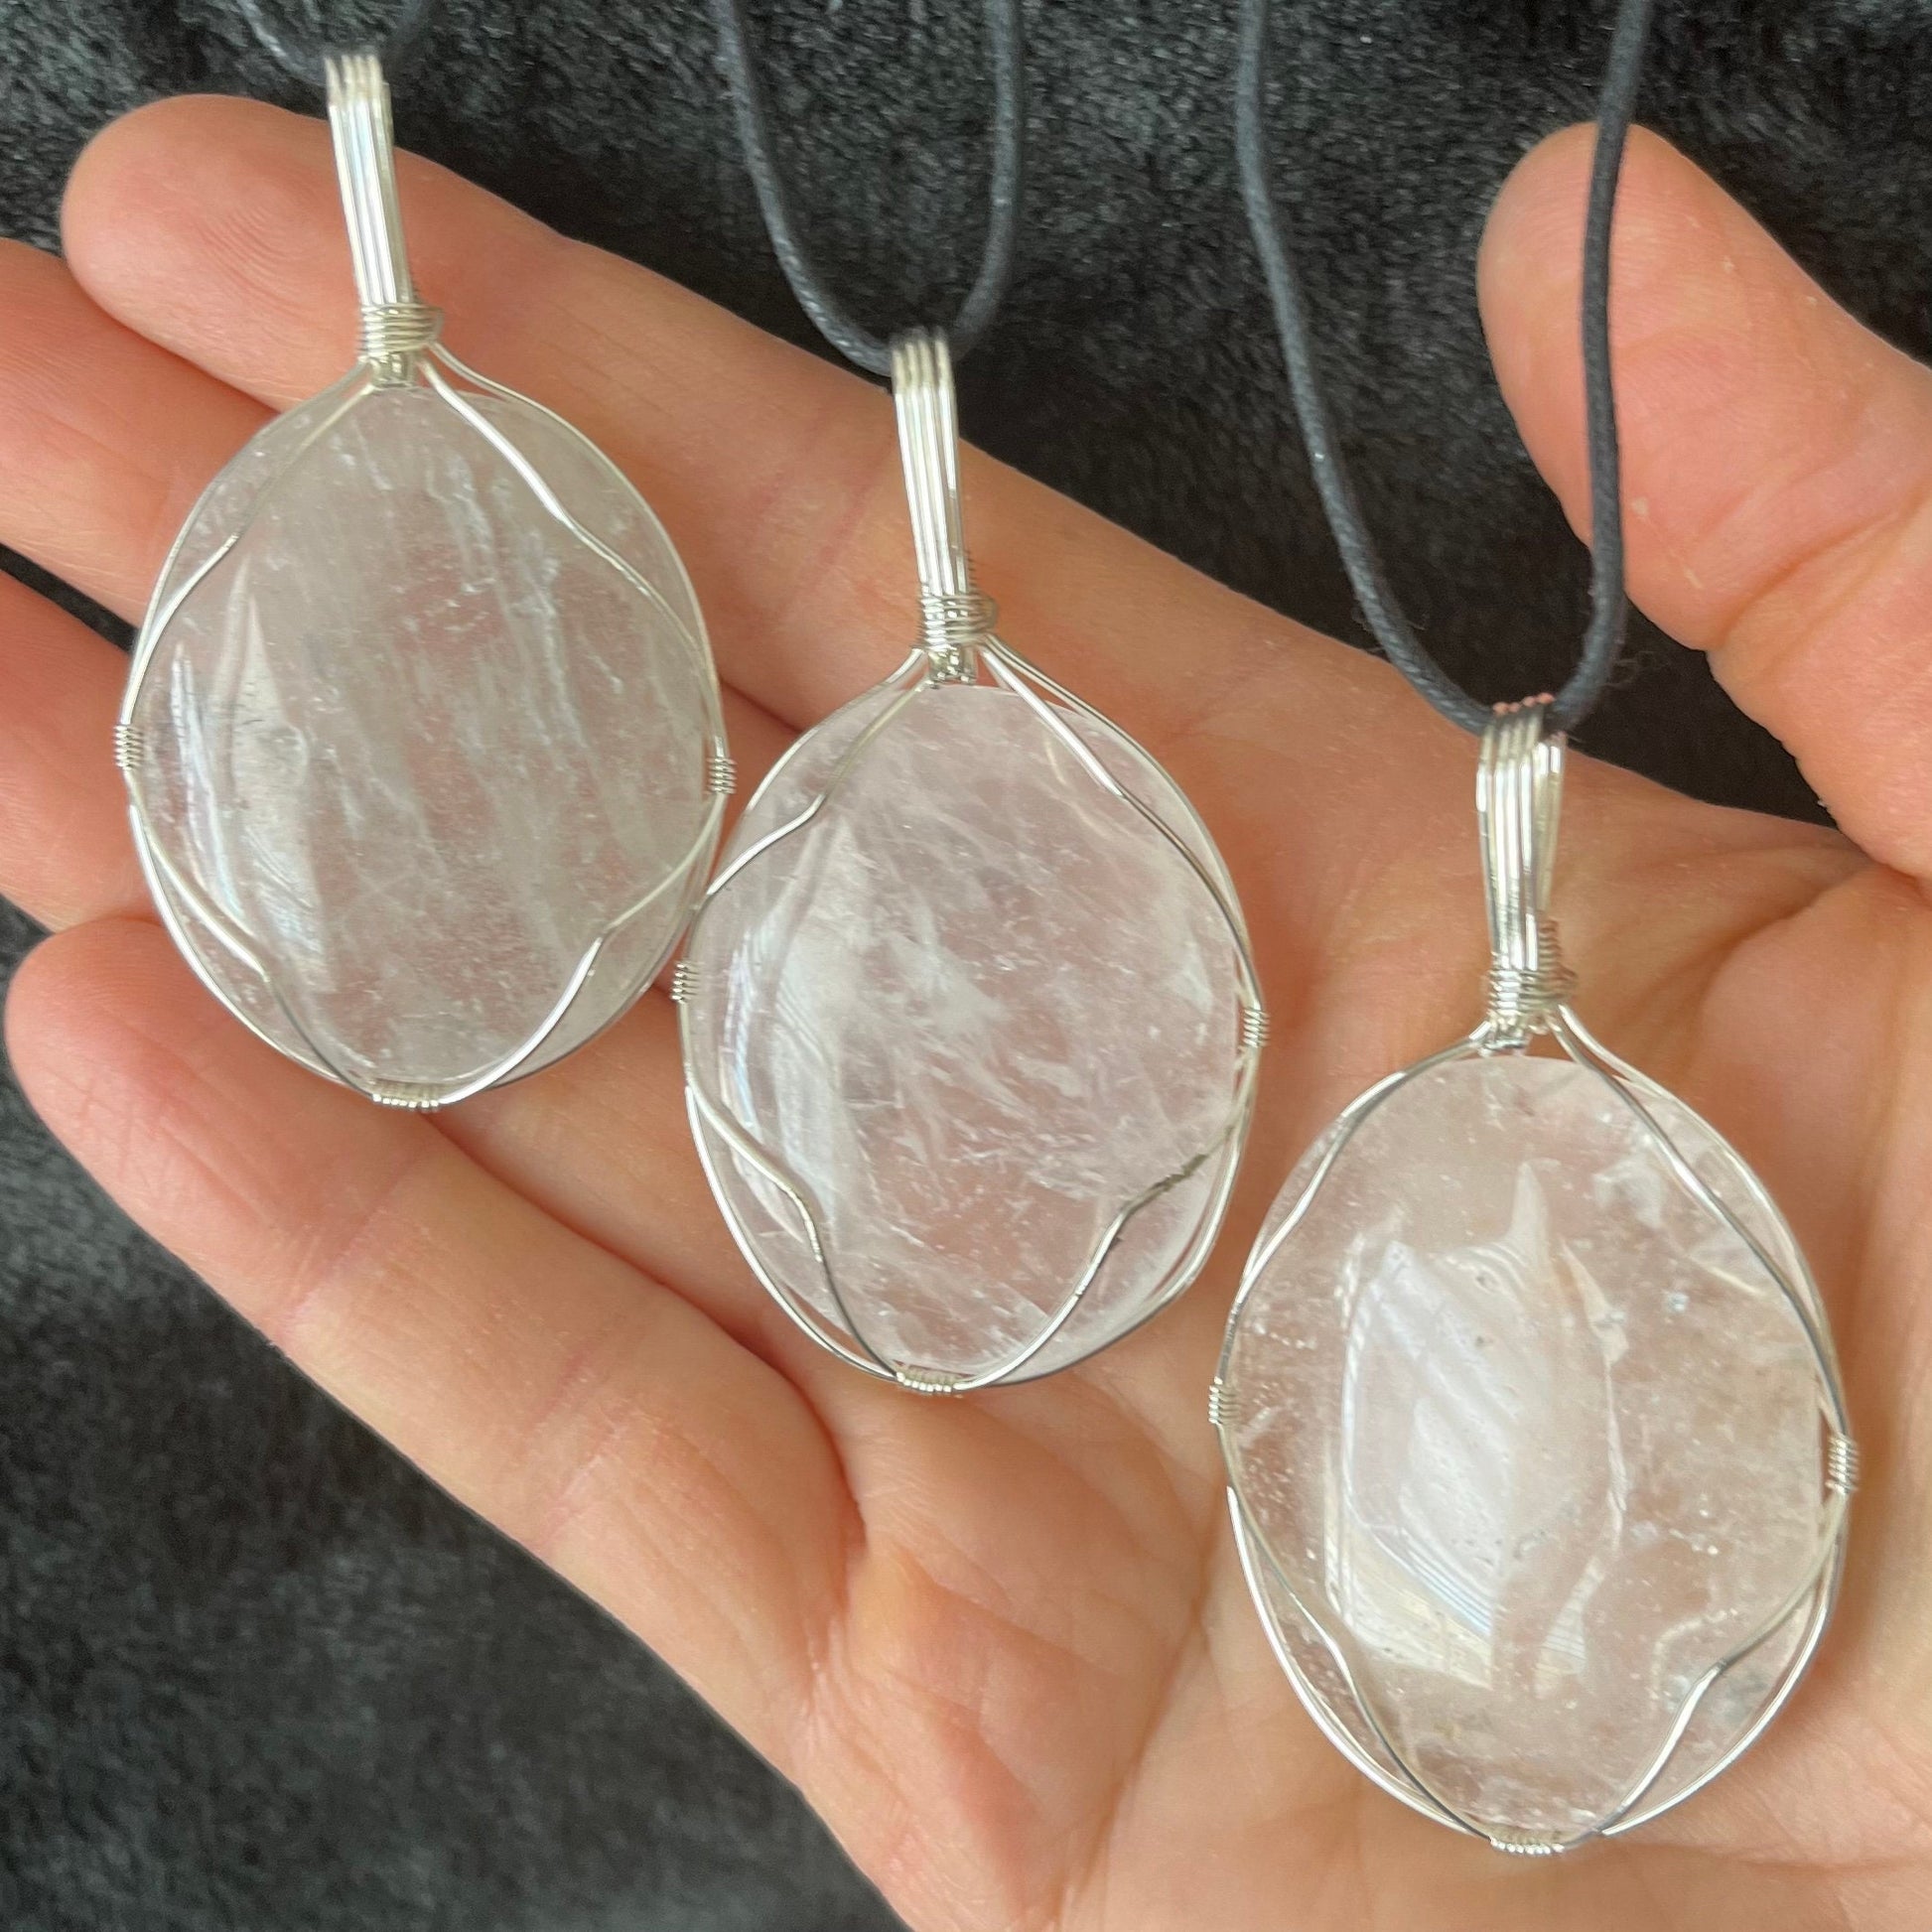 3 clear quartz worry stones silver wire wrapped in a way that frames the stones beautifully, allowing access to the smoothe concave side on the back.  pendants are approximately 2 inches long and attatched to adjustable black cords.